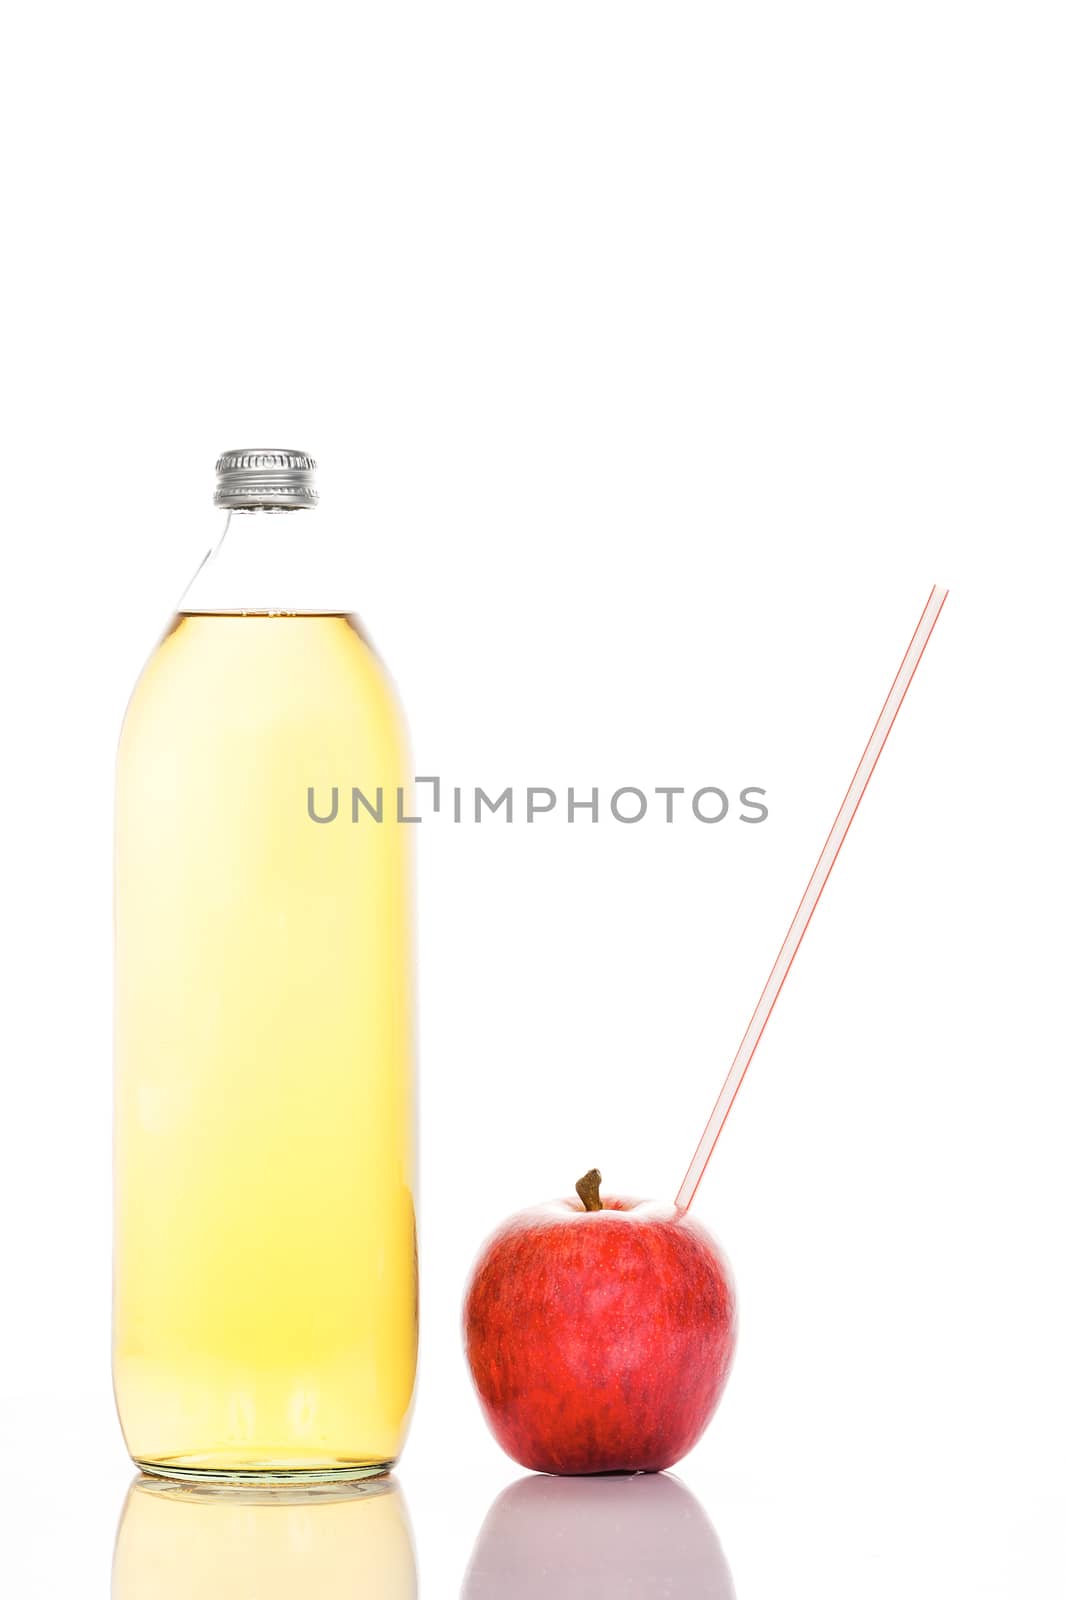 Apple juice in a glass bottle and apple with straw